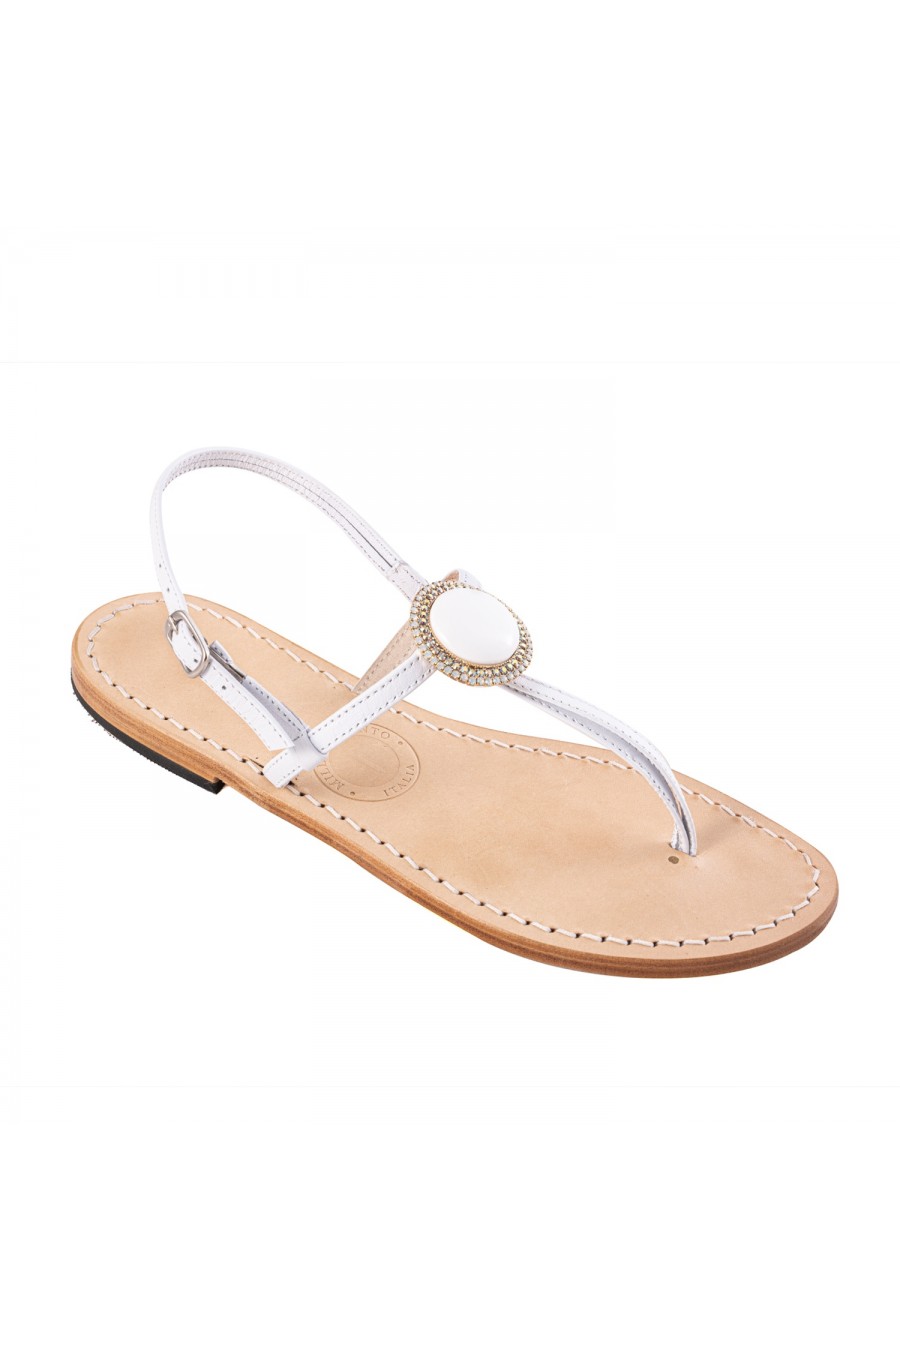 Cinque Terre Elegance Handcrafted Flat leather sandals